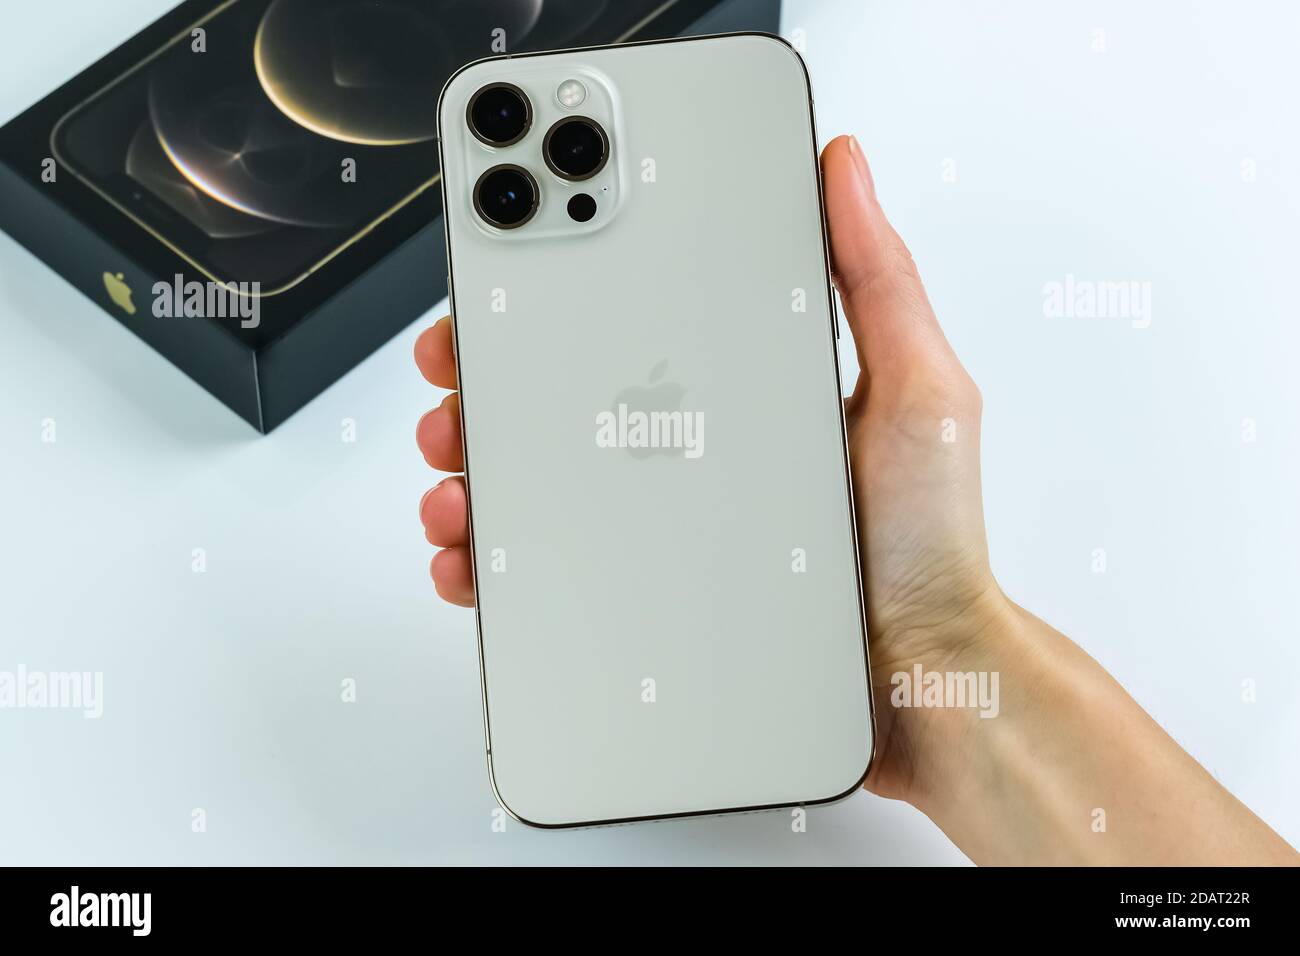 Iphone 12 Pro Max In The Gold Color In The Hand Of A Customer Stock Photo Alamy